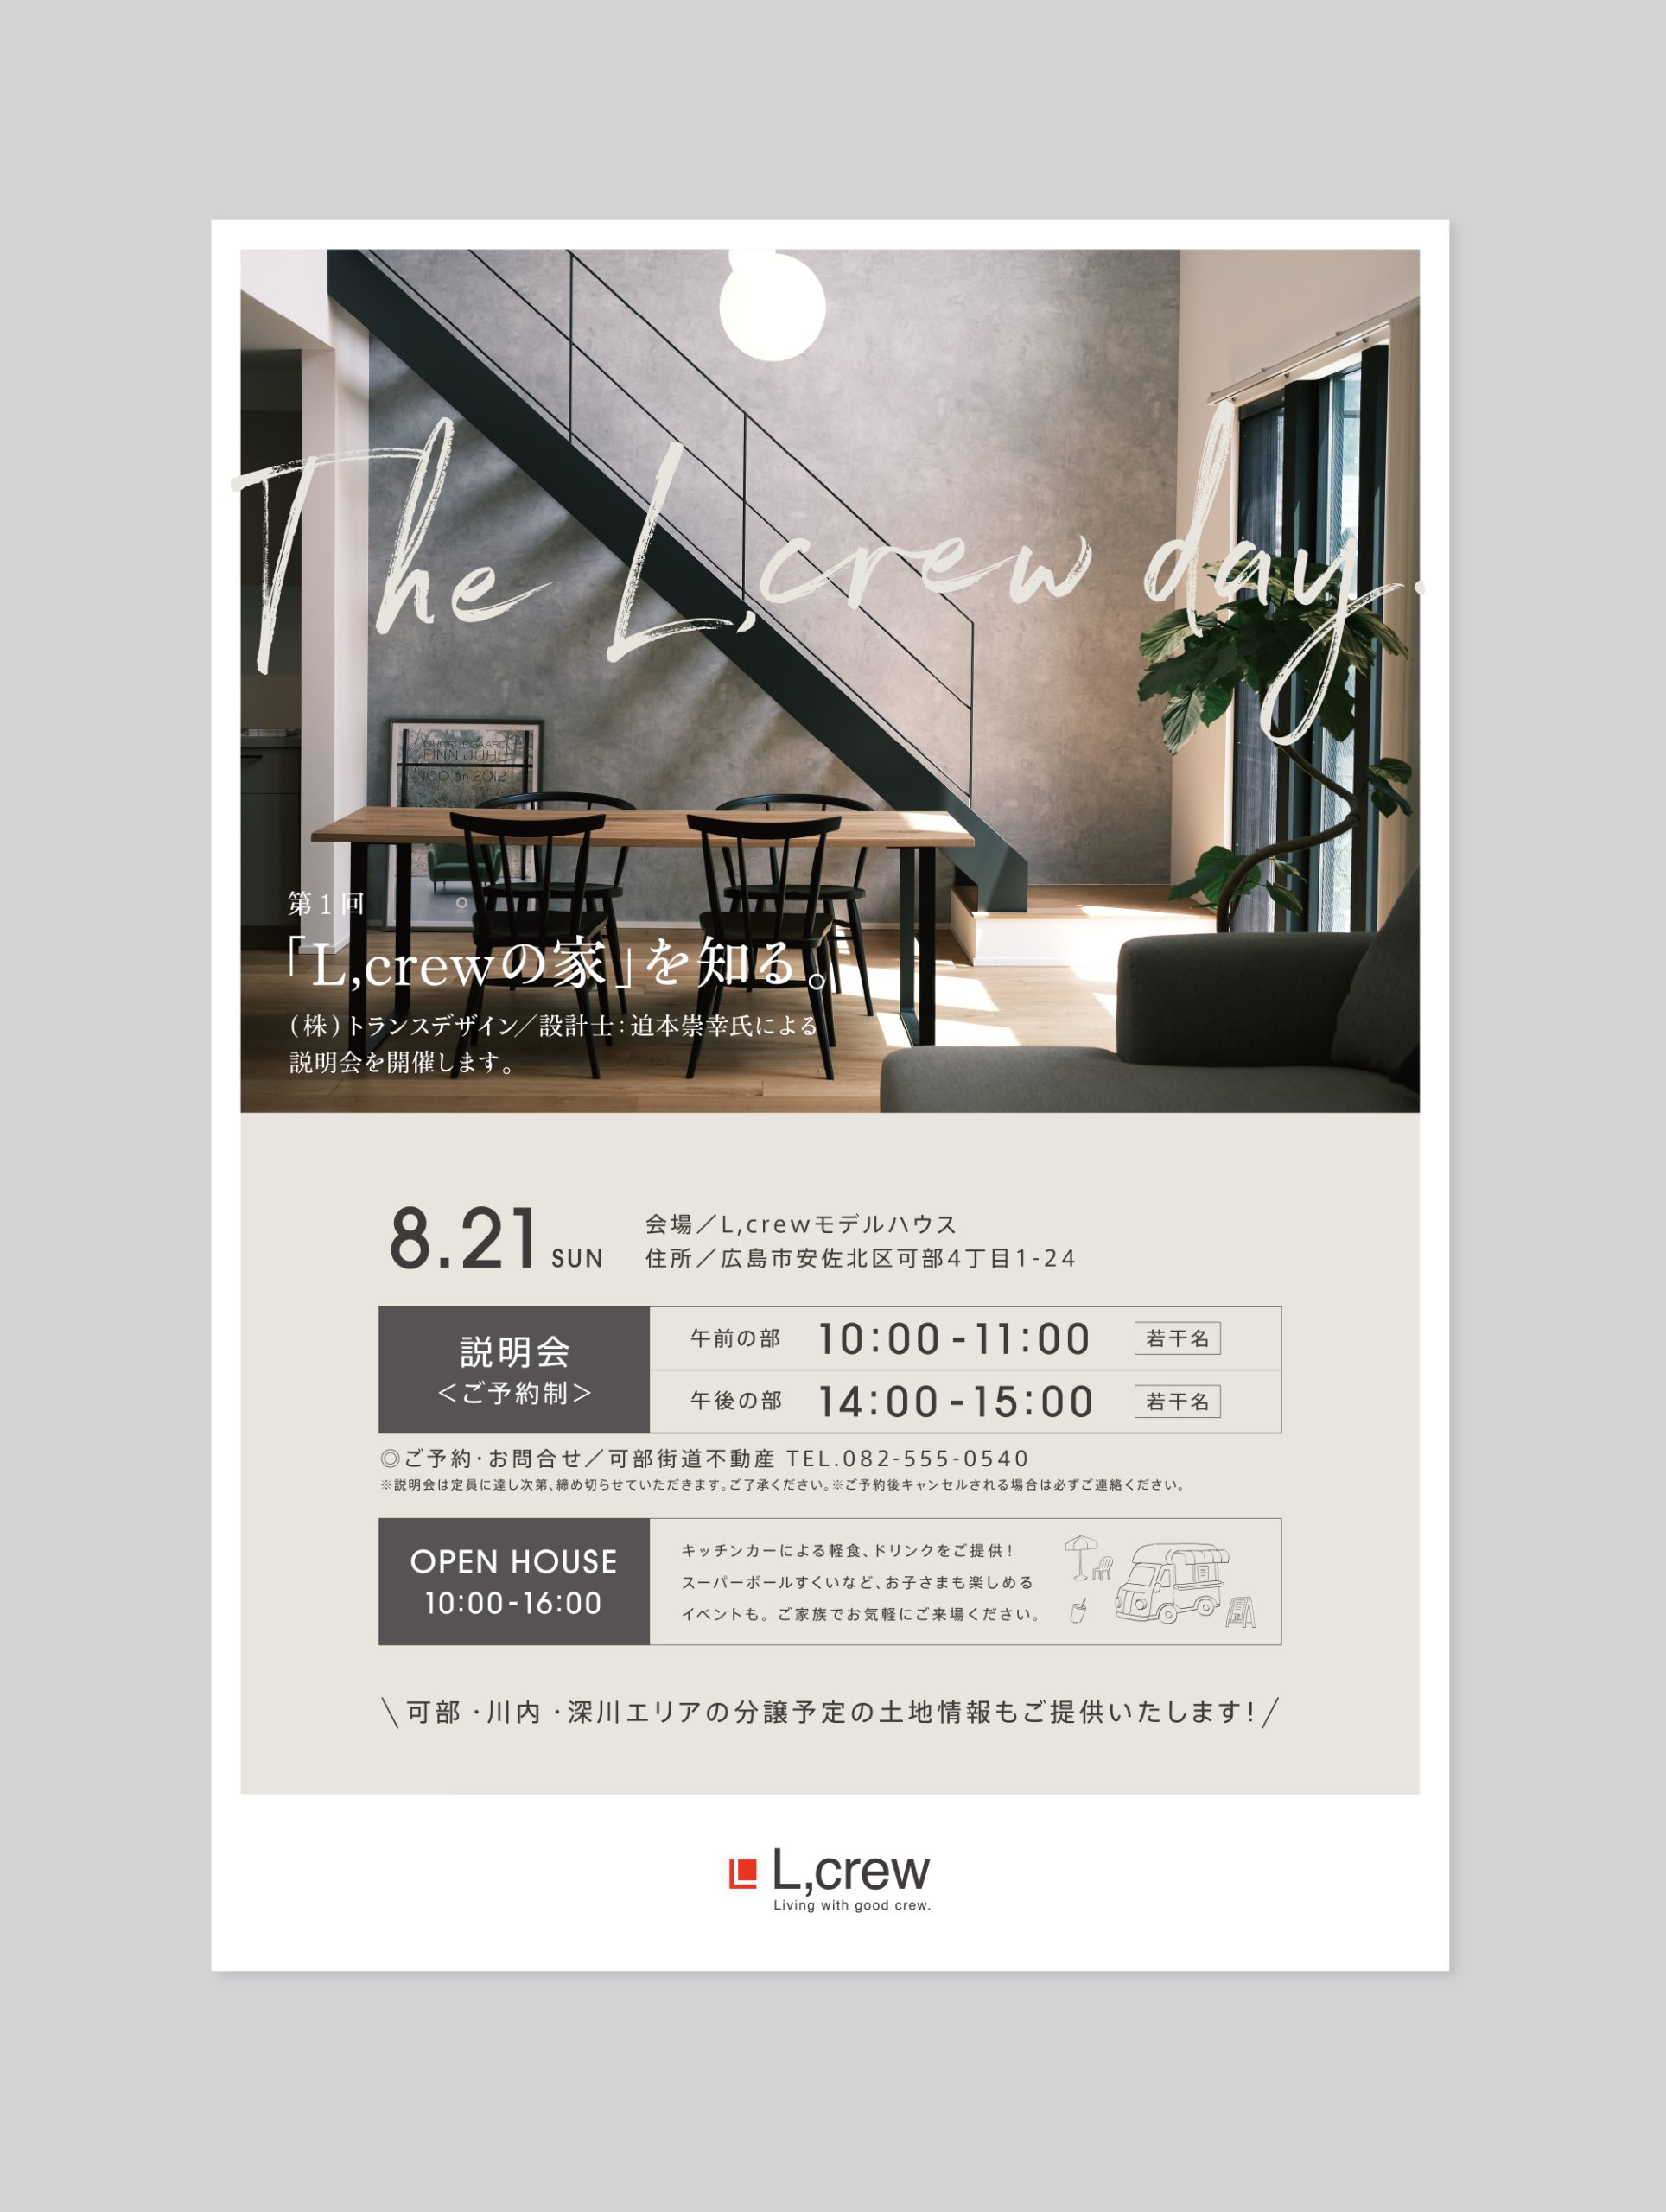 The L,crew day OPEN HOUSEチラシ